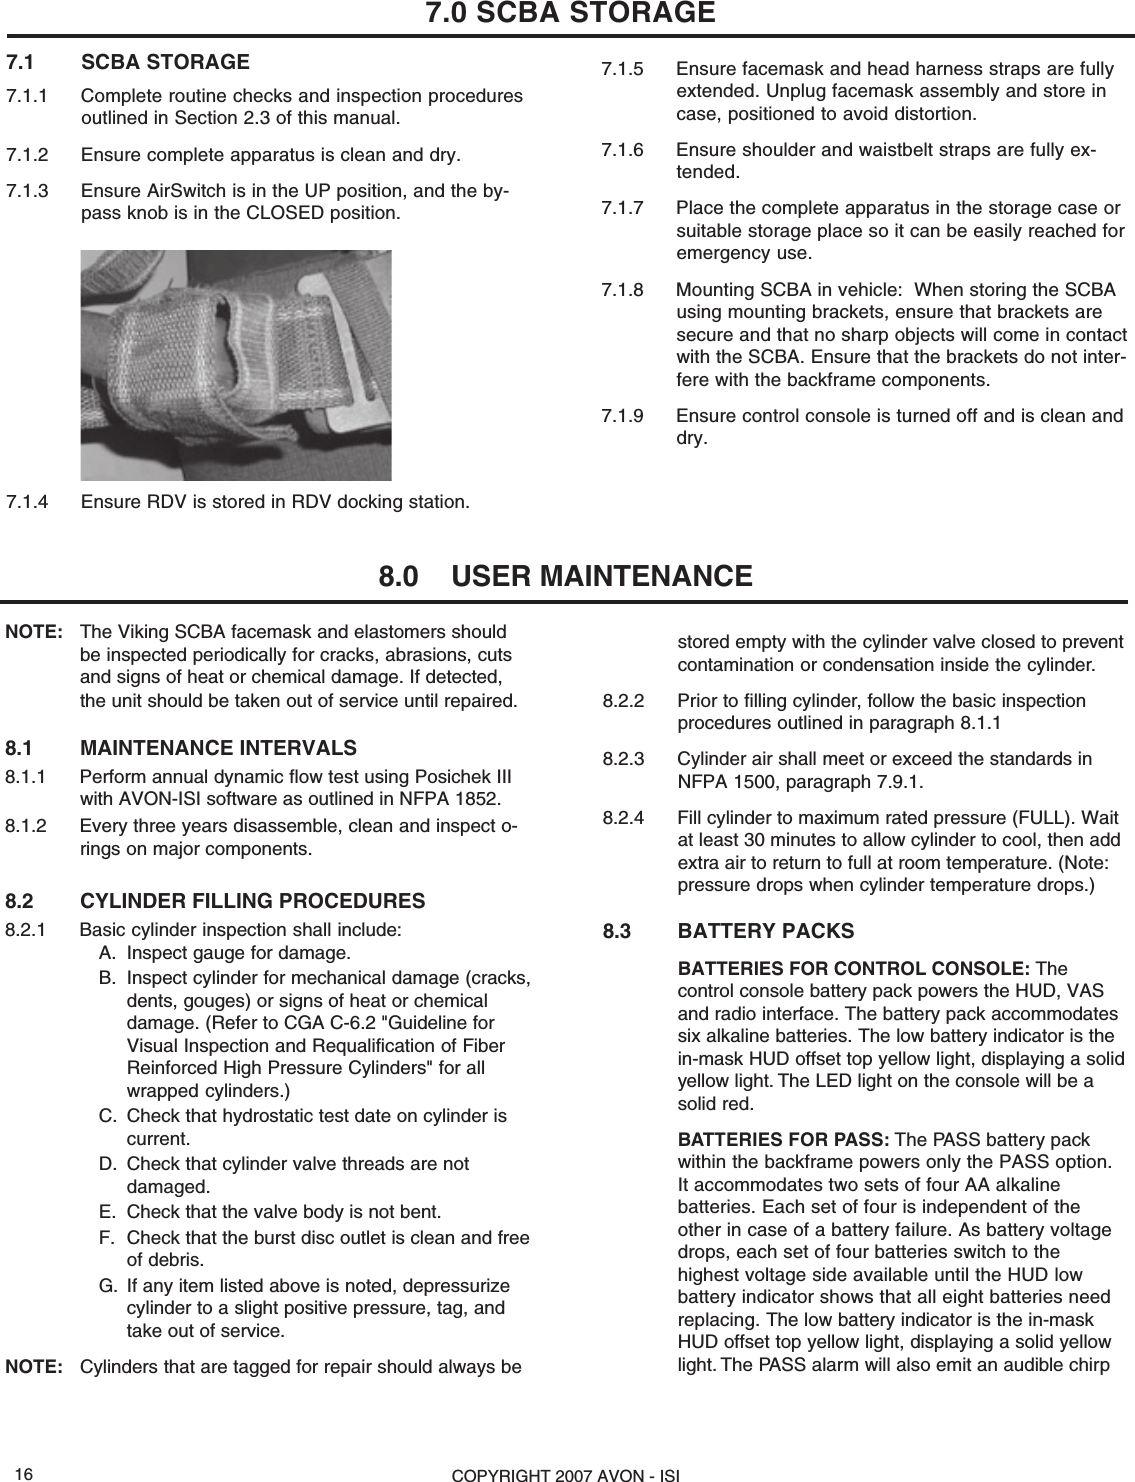 COPYRIGHT 2007 AVON - ISI16stored empty with the cylinder valve closed to preventcontamination or condensation inside the cylinder.8.2.2 Prior to filling cylinder, follow the basic inspectionprocedures outlined in paragraph 8.1.18.2.3 Cylinder air shall meet or exceed the standards inNFPA 1500, paragraph 7.9.1.8.2.4 Fill cylinder to maximum rated pressure (FULL). Waitat least 30 minutes to allow cylinder to cool, then addextra air to return to full at room temperature. (Note:pressure drops when cylinder temperature drops.)8.3 BATTERY PACKSBATTERIES FOR CONTROL CONSOLE: Thecontrol console battery pack powers the HUD, VASand radio interface. The battery pack accommodatessix alkaline batteries. The low battery indicator is thein-mask HUD offset top yellow light, displaying a solidyellow light. The LED light on the console will be asolid red.BATTERIES FOR PASS: The PASS battery packwithin the backframe powers only the PASS option.It accommodates two sets of four AA alkalinebatteries. Each set of four is independent of theother in case of a battery failure. As battery voltagedrops, each set of four batteries switch to thehighest voltage side available until the HUD lowbattery indicator shows that all eight batteries needreplacing. The low battery indicator is the in-maskHUD offset top yellow light, displaying a solid yellowlight. The PASS alarm will also emit an audible chirpNOTE: The Viking SCBA facemask and elastomers shouldbe inspected periodically for cracks, abrasions, cutsand signs of heat or chemical damage. If detected,the unit should be taken out of service until repaired.8.1 MAINTENANCE INTERVALS8.1.1 Perform annual dynamic flow test using Posichek IIIwith AVON-ISI software as outlined in NFPA 1852.8.1.2 Every three years disassemble, clean and inspect o-rings on major components.8.2 CYLINDER FILLING PROCEDURES8.2.1 Basic cylinder inspection shall include:A. Inspect gauge for damage.B. Inspect cylinder for mechanical damage (cracks,dents, gouges) or signs of heat or chemicaldamage. (Refer to CGA C-6.2 &quot;Guideline forVisual Inspection and Requalification of FiberReinforced High Pressure Cylinders&quot; for allwrapped cylinders.)C. Check that hydrostatic test date on cylinder iscurrent.D. Check that cylinder valve threads are notdamaged.E. Check that the valve body is not bent.F. Check that the burst disc outlet is clean and freeof debris.G. If any item listed above is noted, depressurizecylinder to a slight positive pressure, tag, andtake out of service.NOTE: Cylinders that are tagged for repair should always be7.1 SCBA STORAGE7.1.1 Complete routine checks and inspection proceduresoutlined in Section 2.3 of this manual.7.1.2 Ensure complete apparatus is clean and dry.7.1.3 Ensure AirSwitch is in the UP position, and the by-pass knob is in the CLOSED position.7.1.4 Ensure RDV is stored in RDV docking station.7.1.5 Ensure facemask and head harness straps are fullyextended. Unplug facemask assembly and store incase, positioned to avoid distortion.7.1.6 Ensure shoulder and waistbelt straps are fully ex-tended.7.1.7 Place the complete apparatus in the storage case orsuitable storage place so it can be easily reached foremergency use.7.1.8 Mounting SCBA in vehicle:  When storing the SCBAusing mounting brackets, ensure that brackets aresecure and that no sharp objects will come in contactwith the SCBA. Ensure that the brackets do not inter-fere with the backframe components.7.1.9 Ensure control console is turned off and is clean anddry.7.0 SCBA STORAGE8.0    USER MAINTENANCE